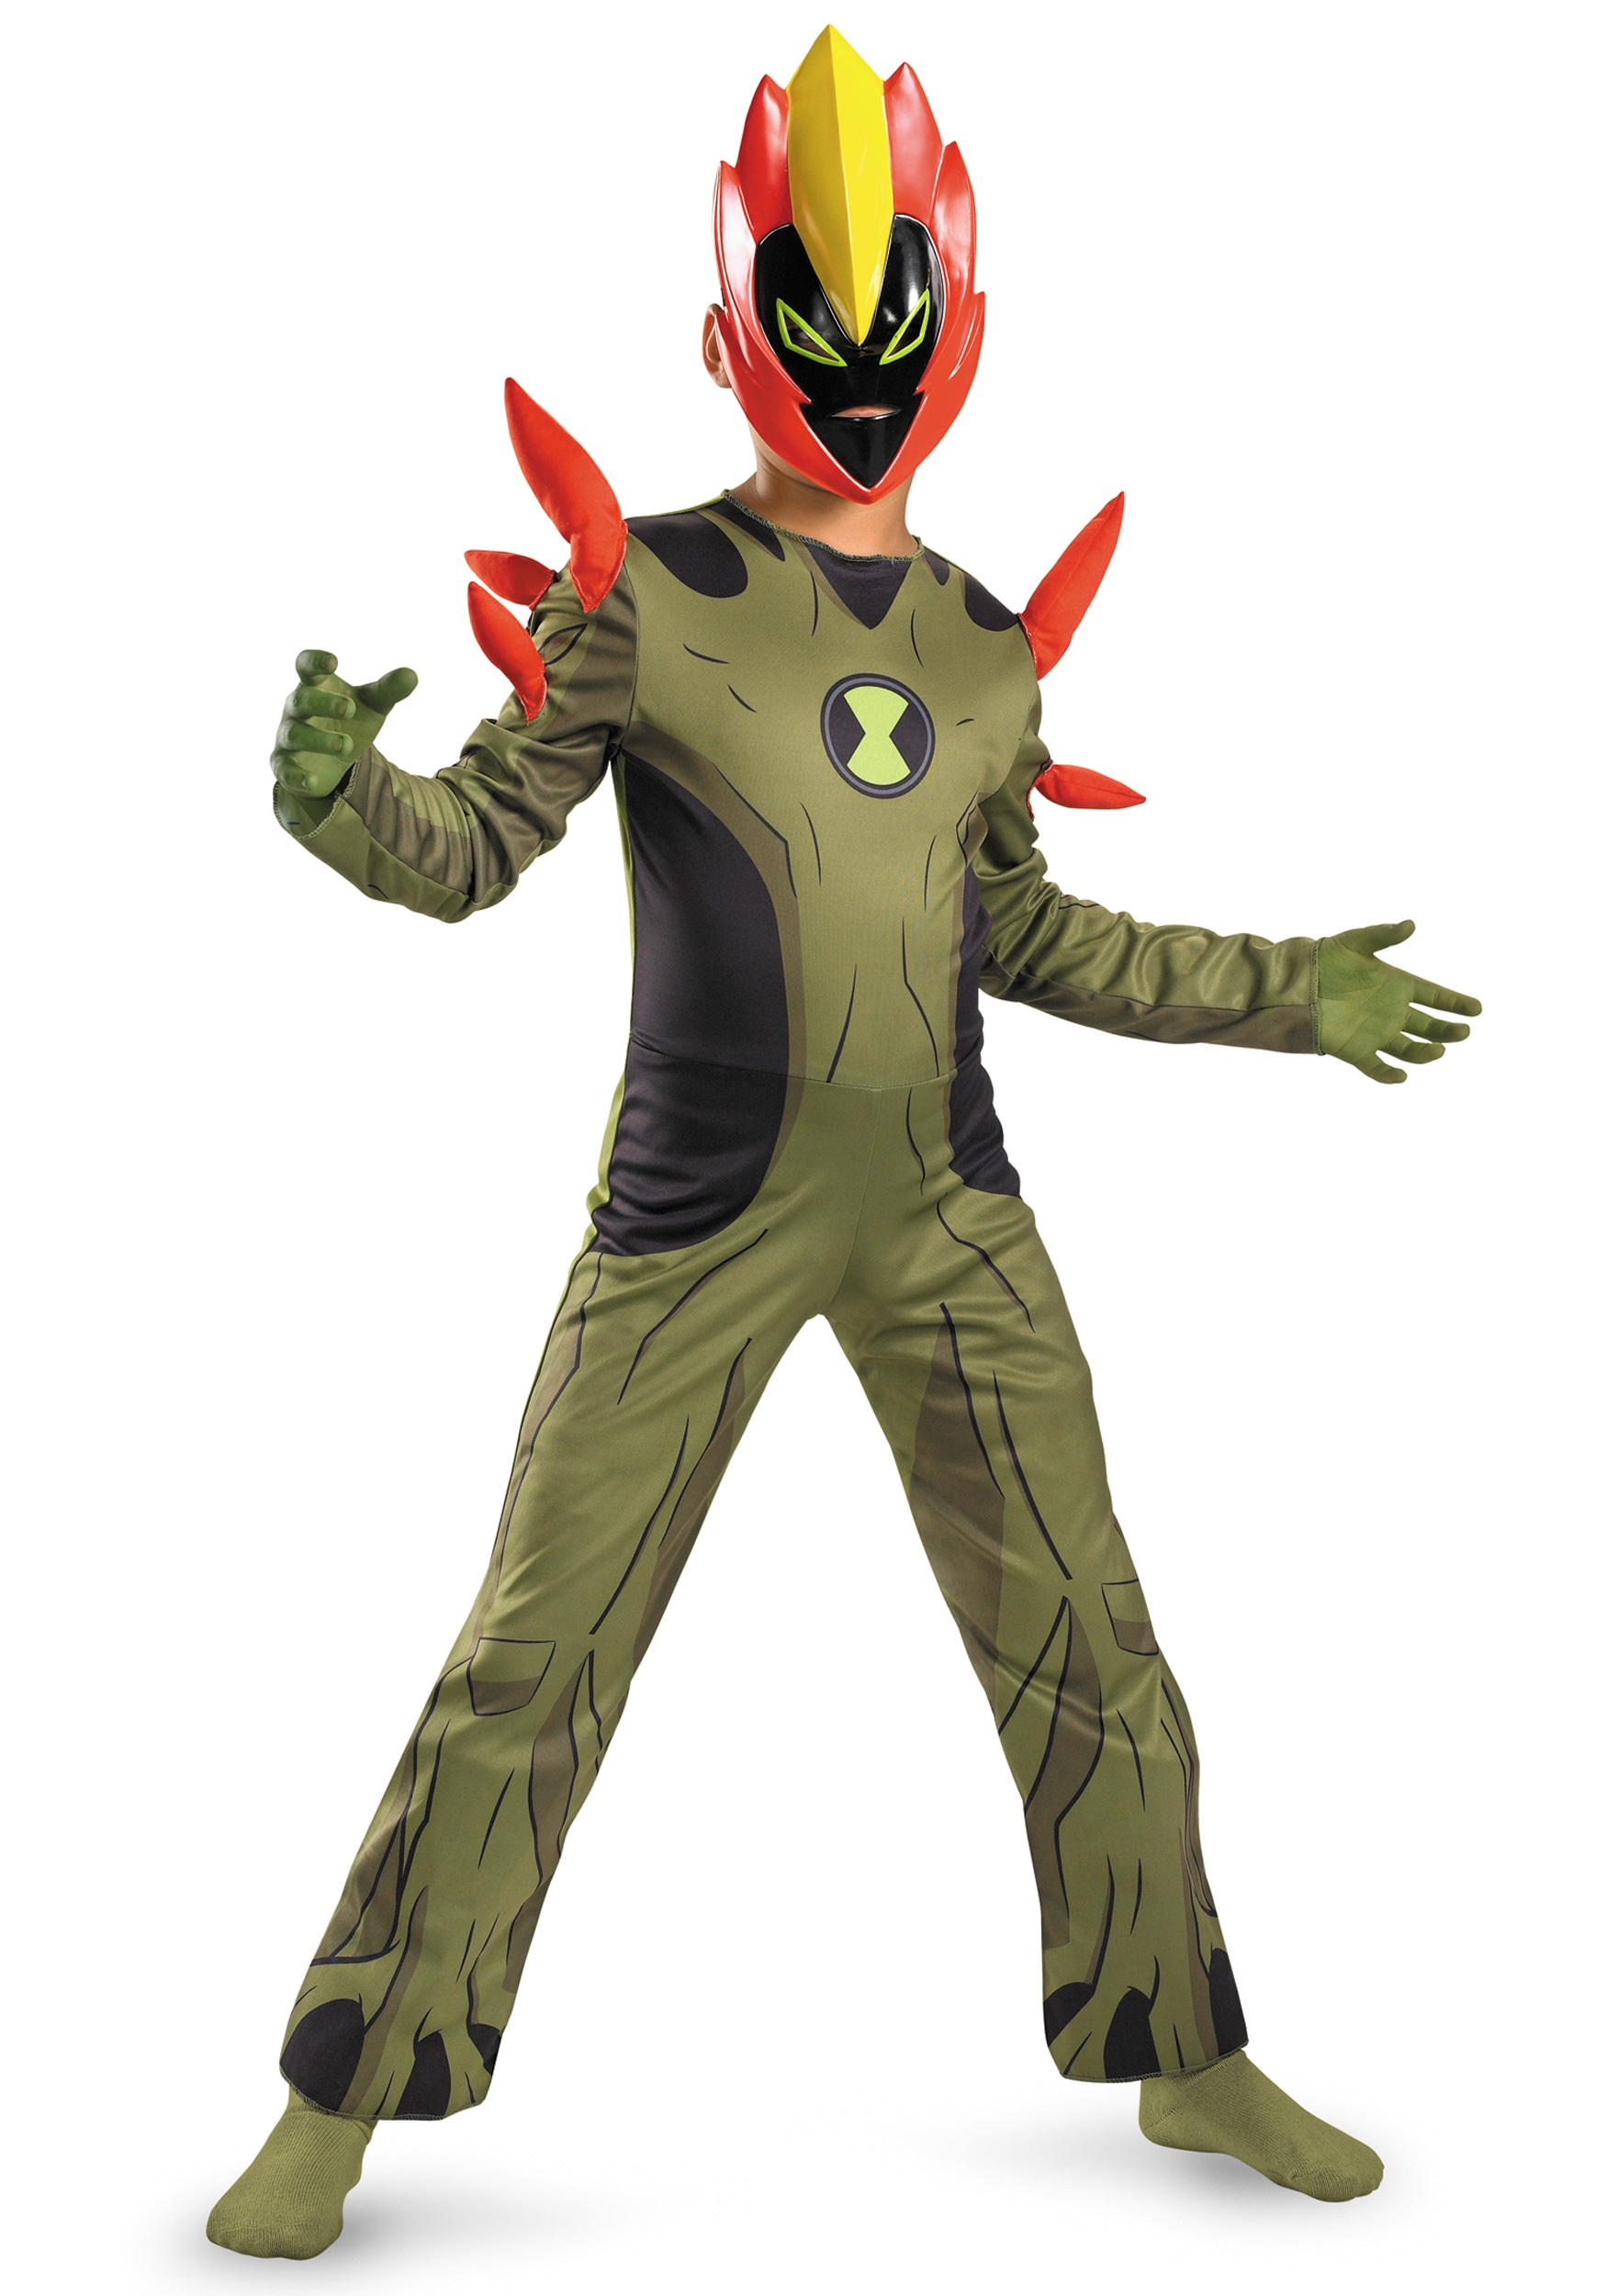 Kids Swampfire Costume | This Kids Swampfire Costume is a fun child Ben 10 cost...